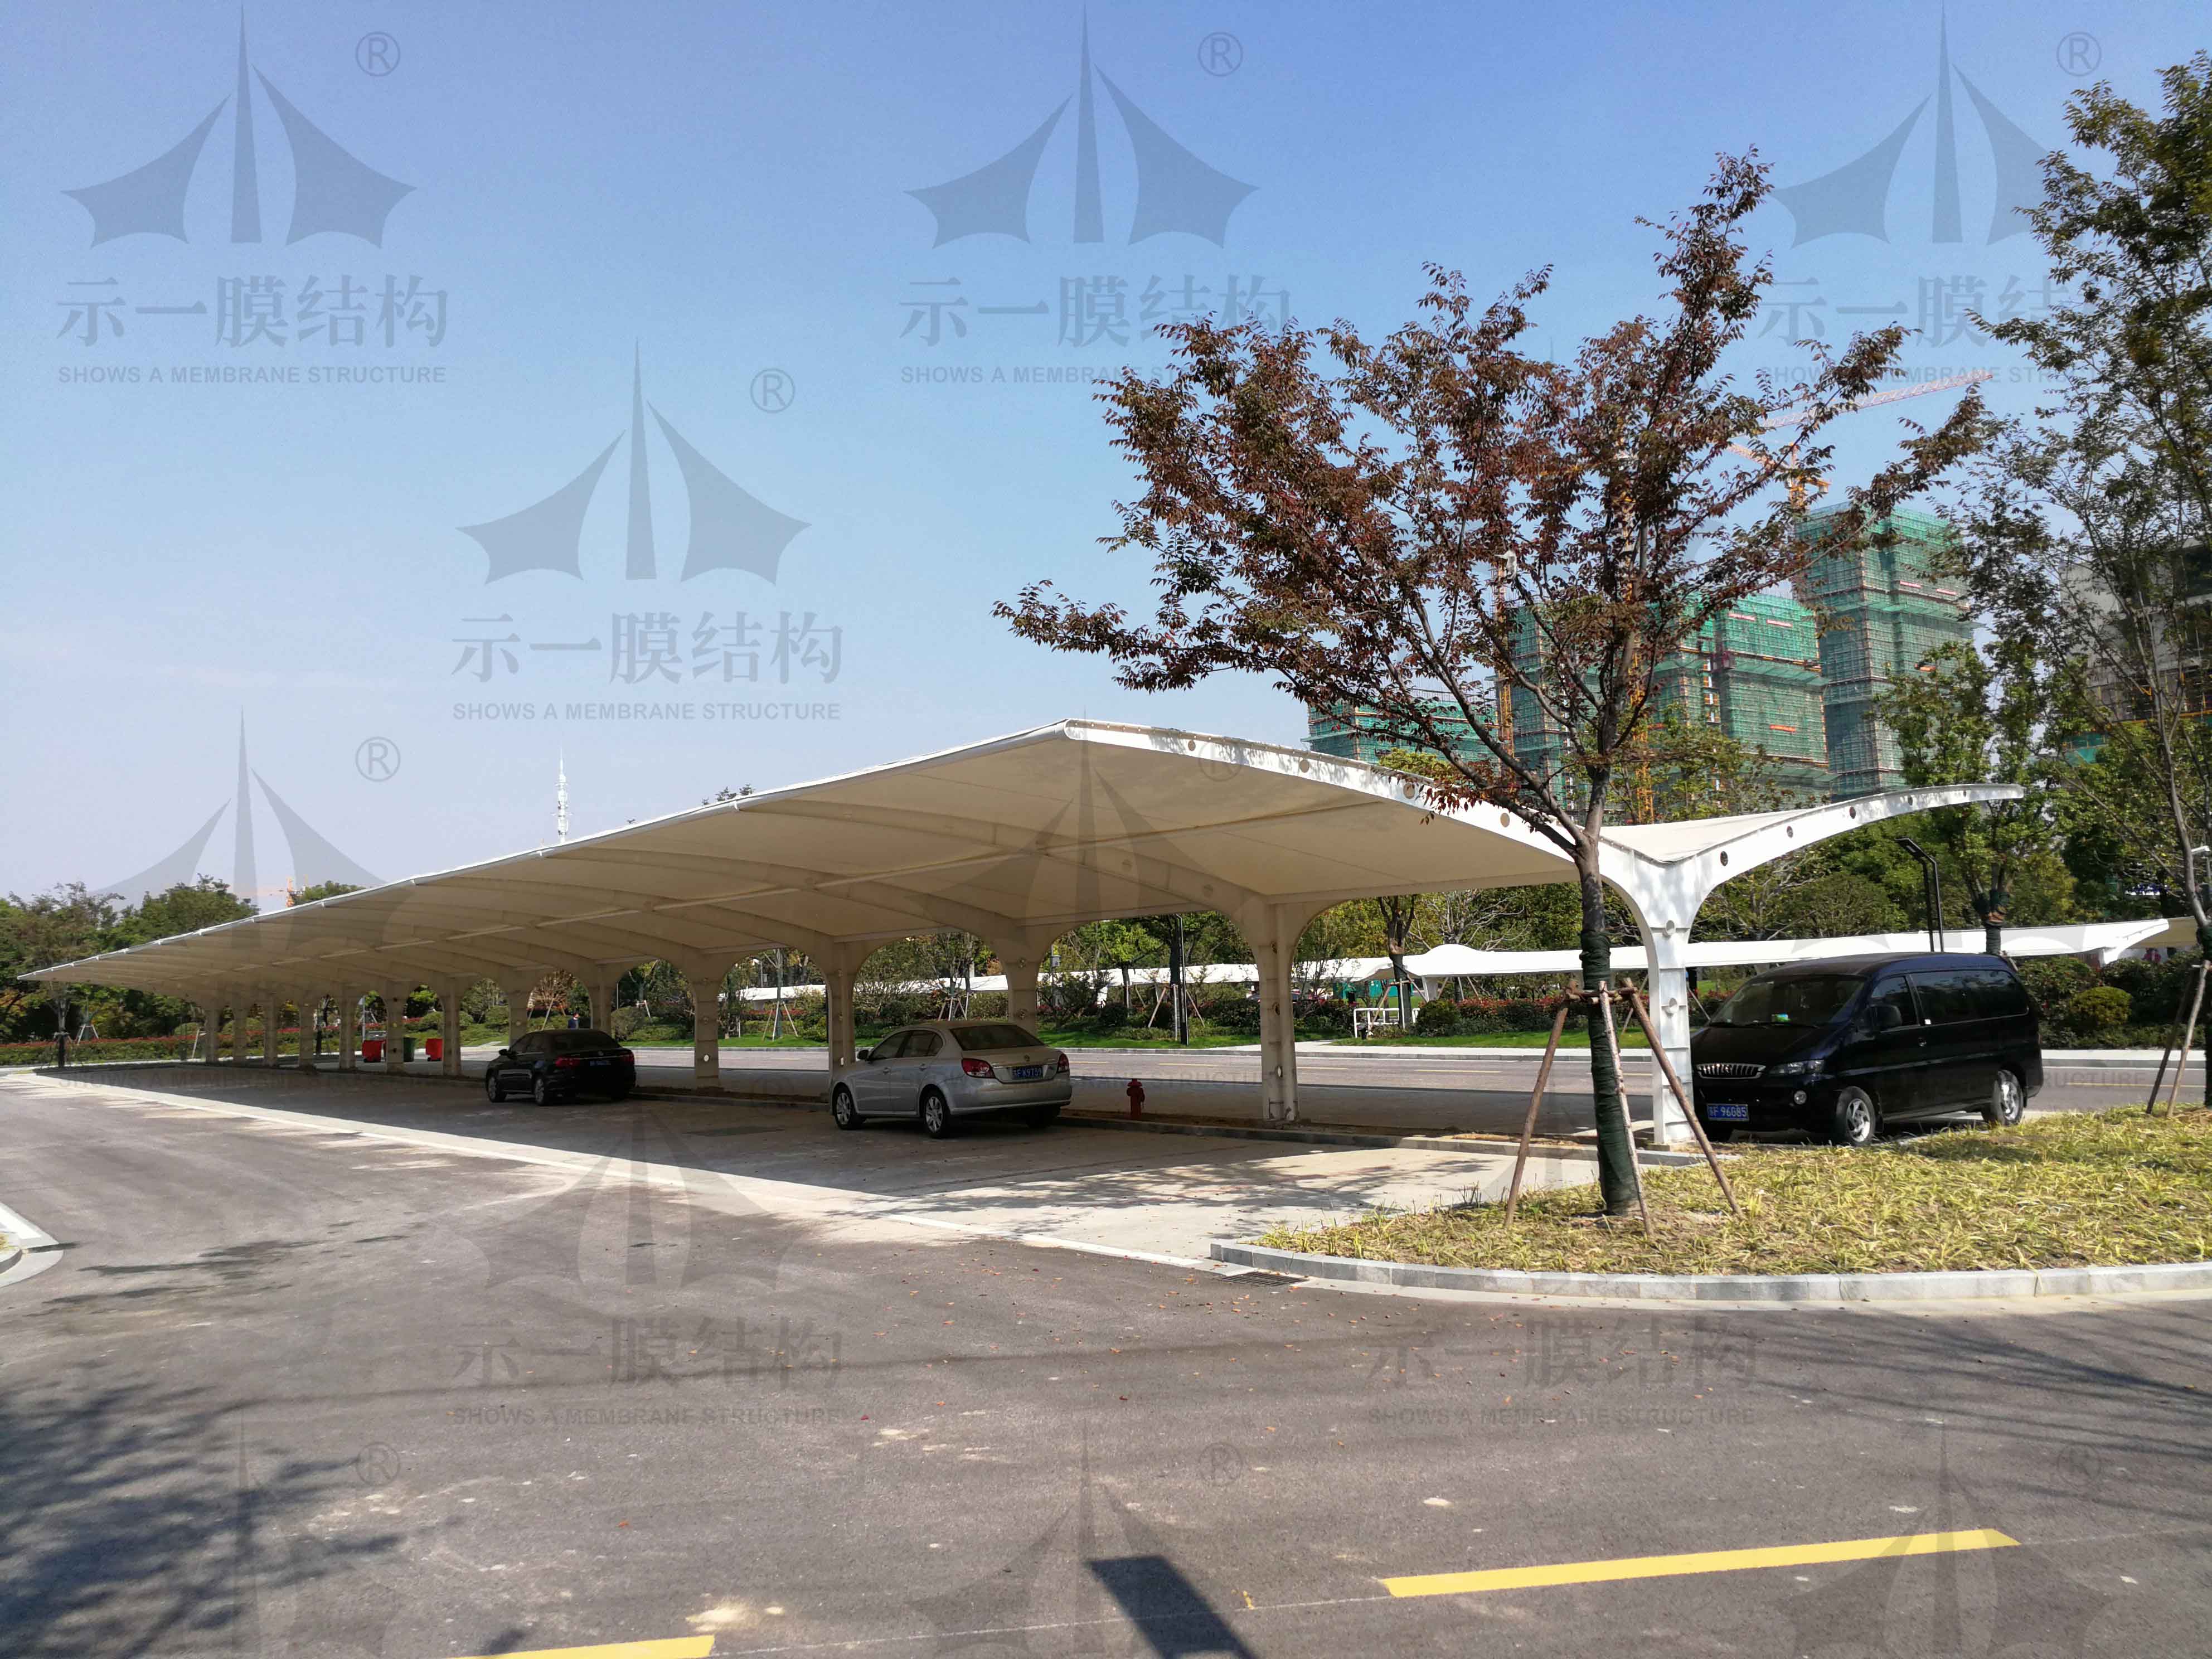 Nantong Municipal Government's membrane structure parking shed